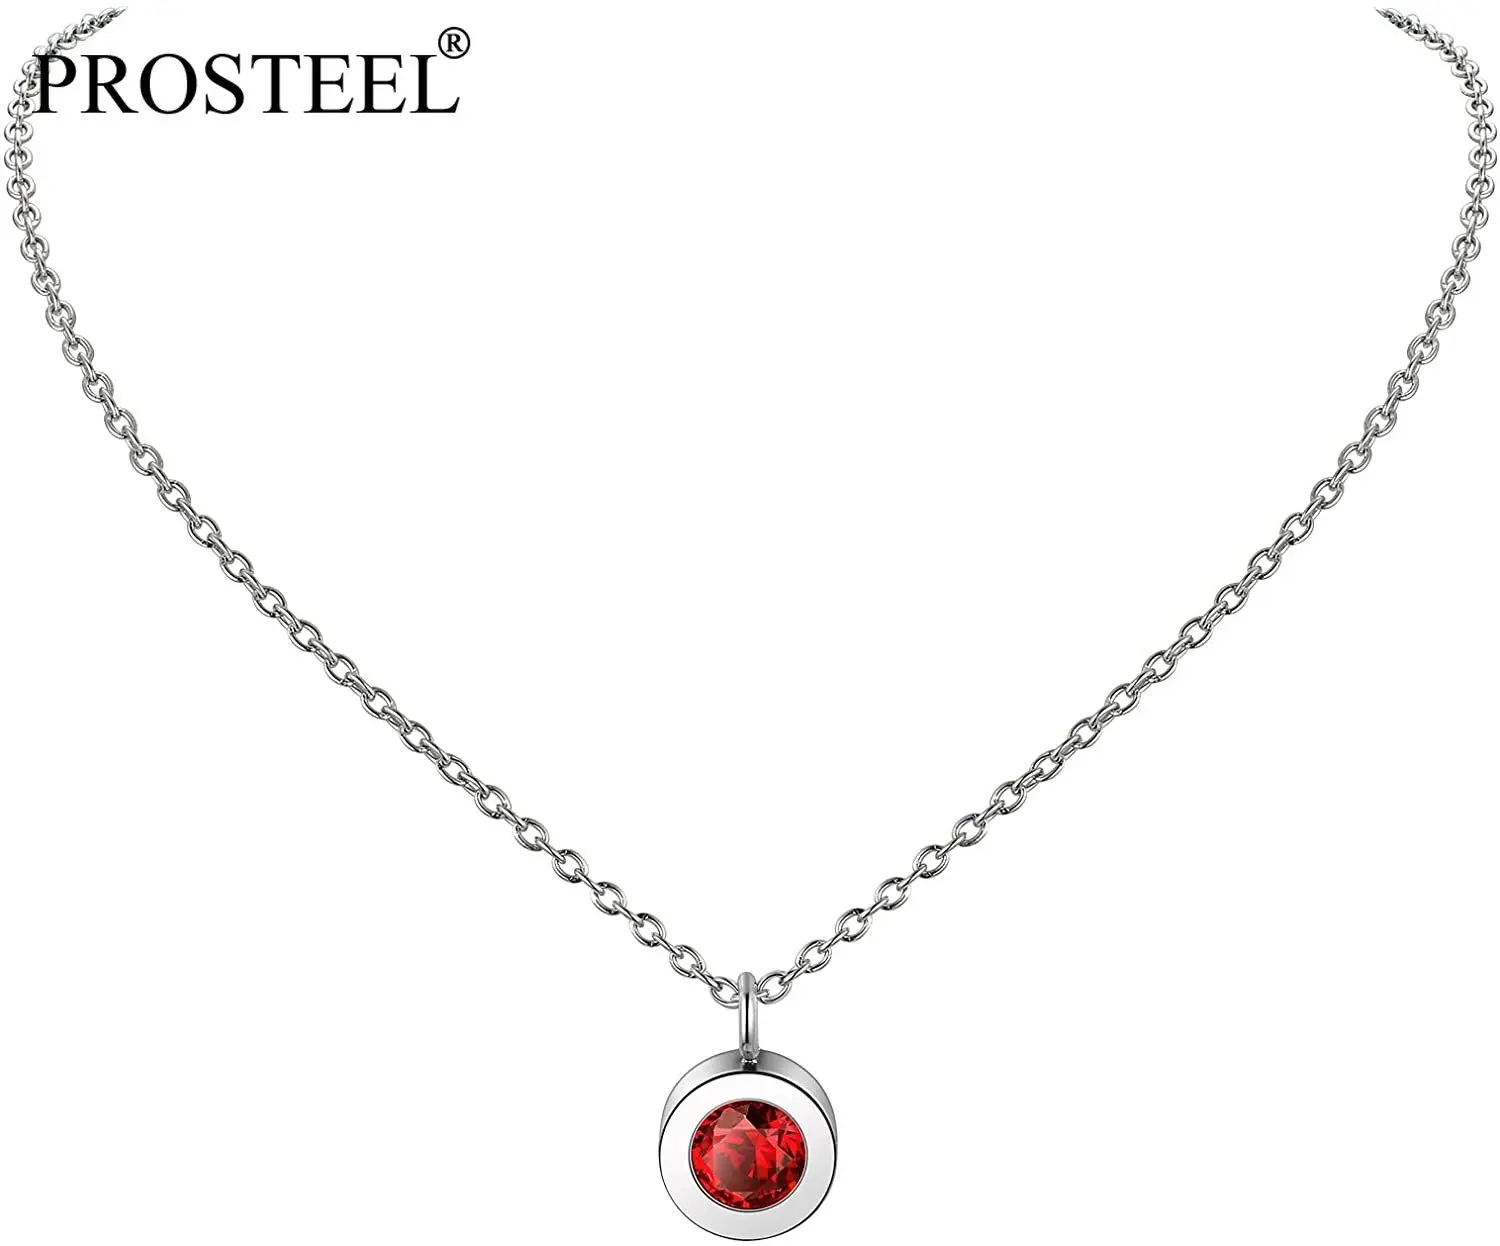 

PROSTEEL Womens Girls Dainty Birthstone Pendant Necklace 12 Months Available Sturdy 316L Stainless Steel Simple Link Chain